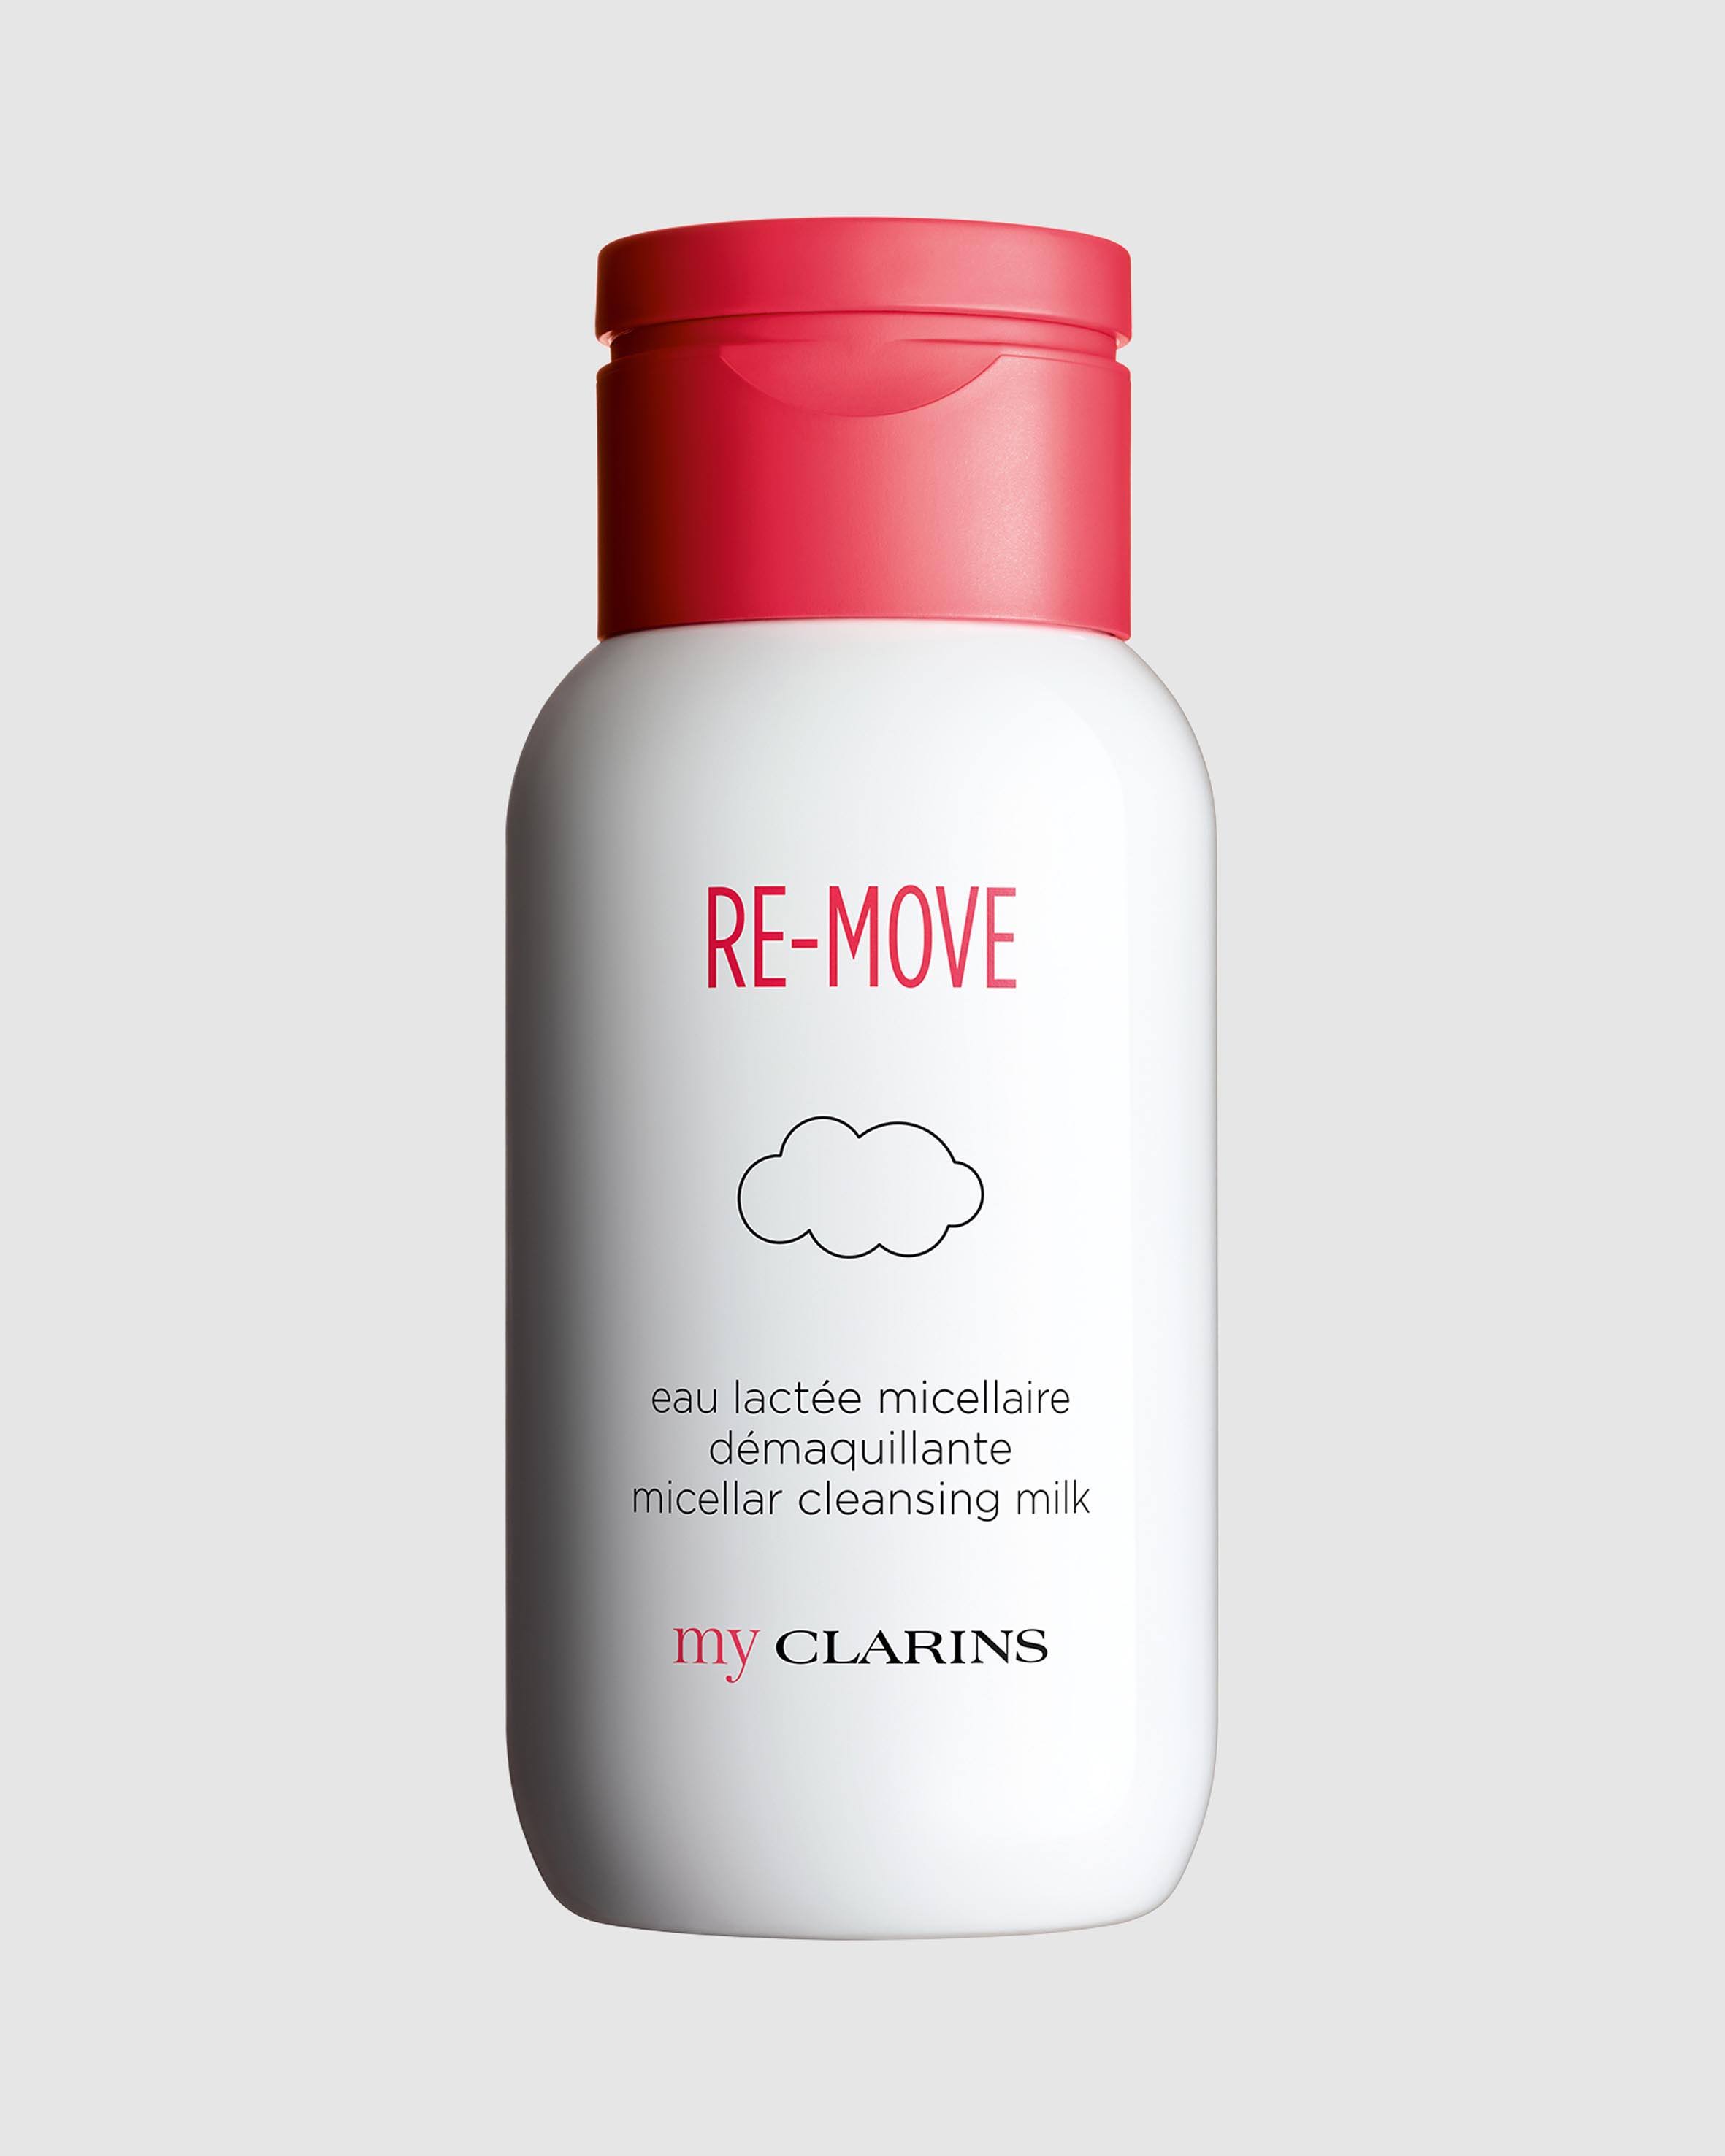 My Clarins Re-Move Micellar Cleansing Milk 200ml